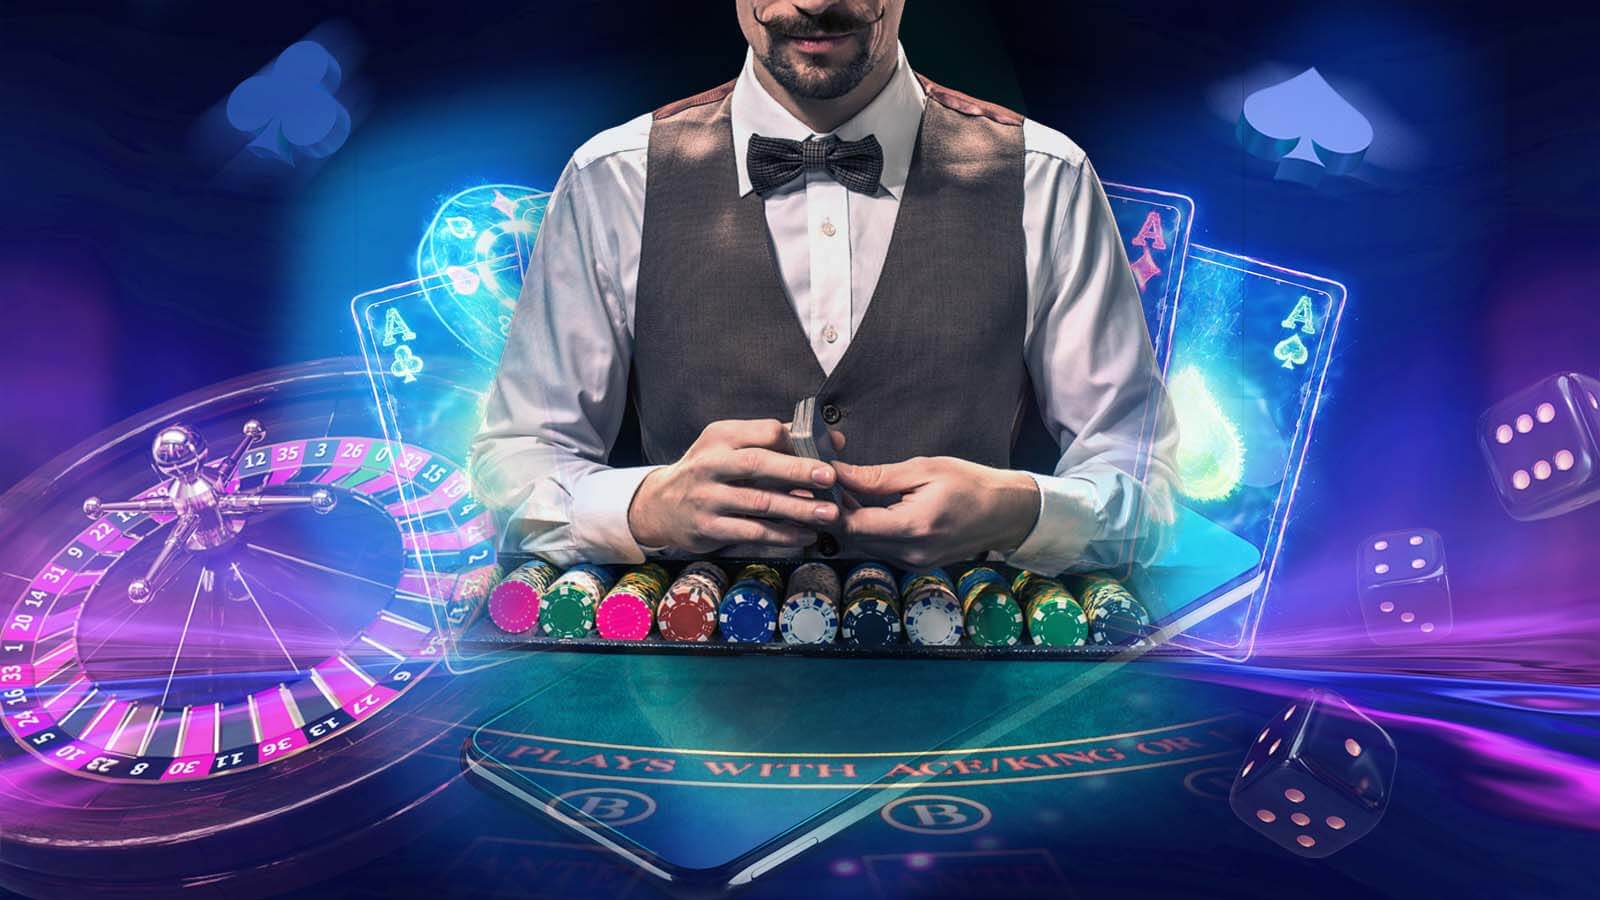 One Casino - No. 1 in Slots, Live dealers and Casino games